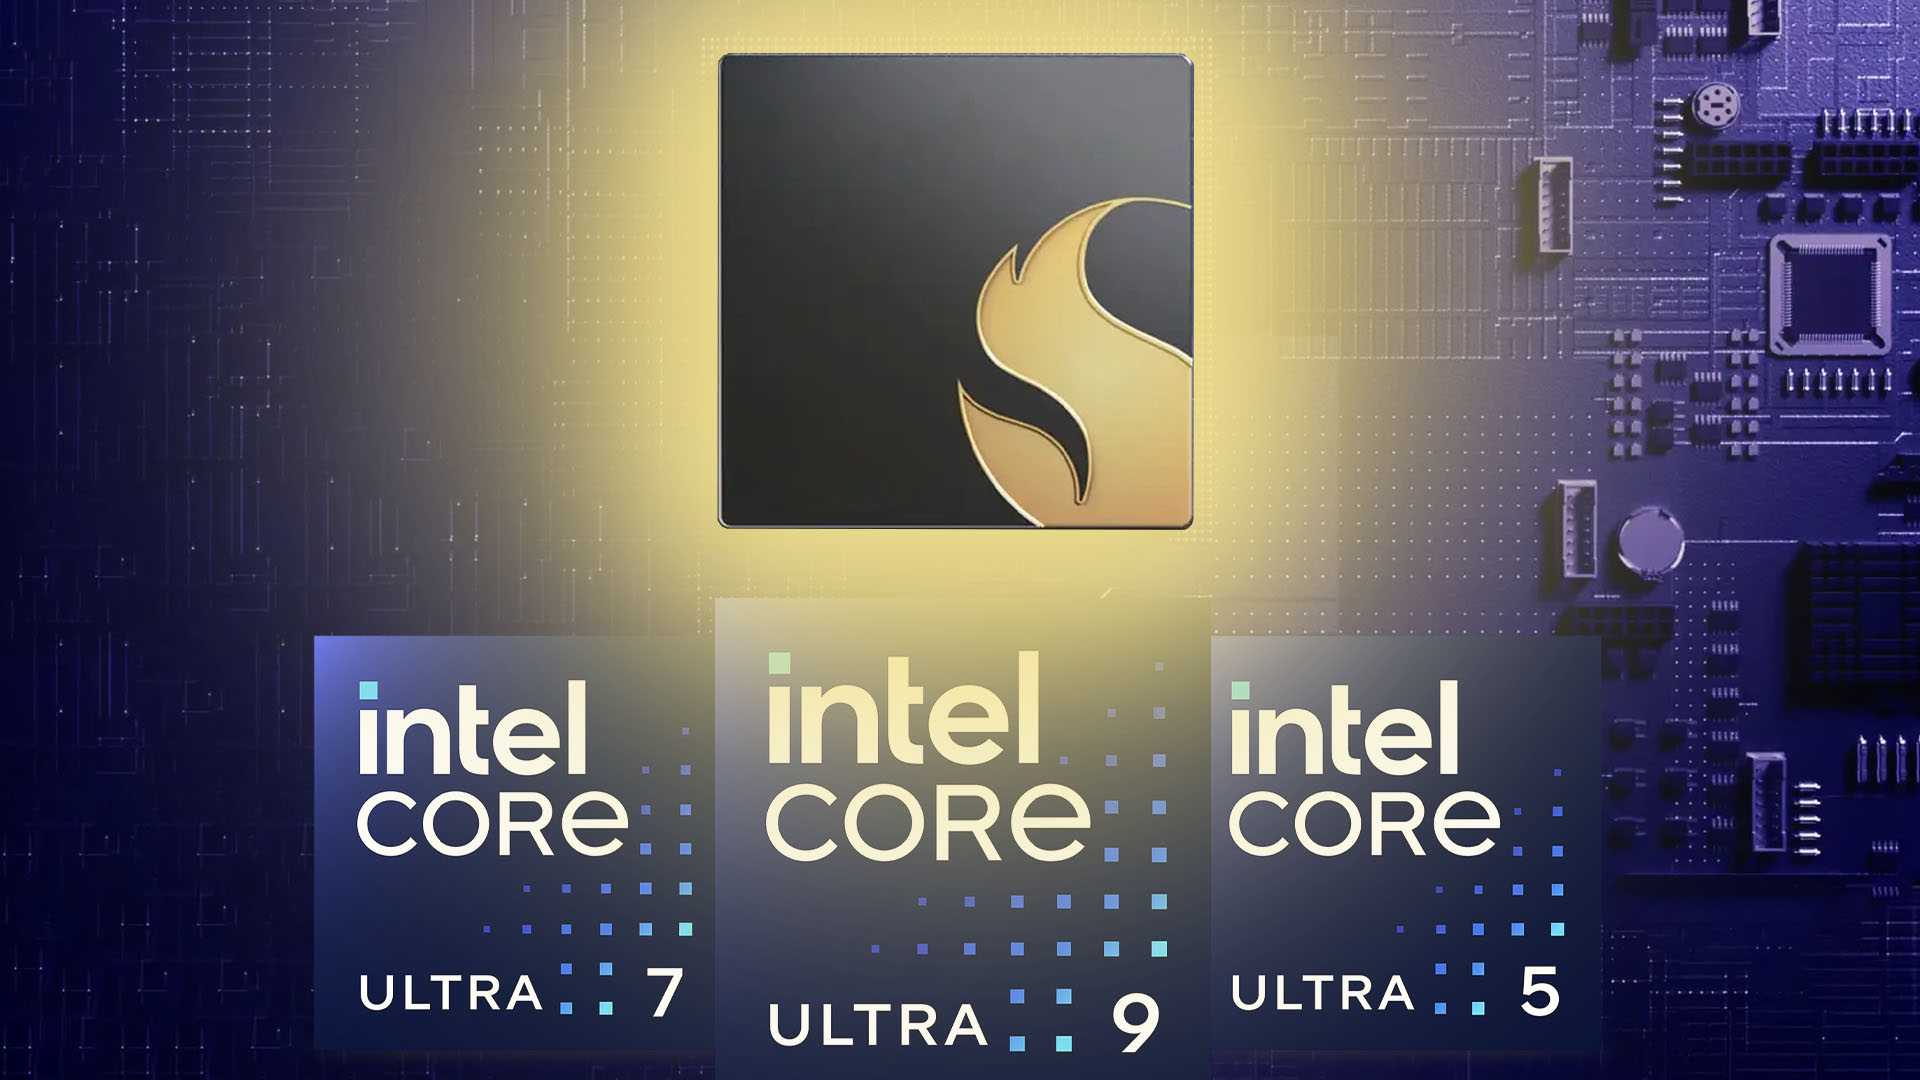 Intel CPUs just got schooled, but not by AMD this time